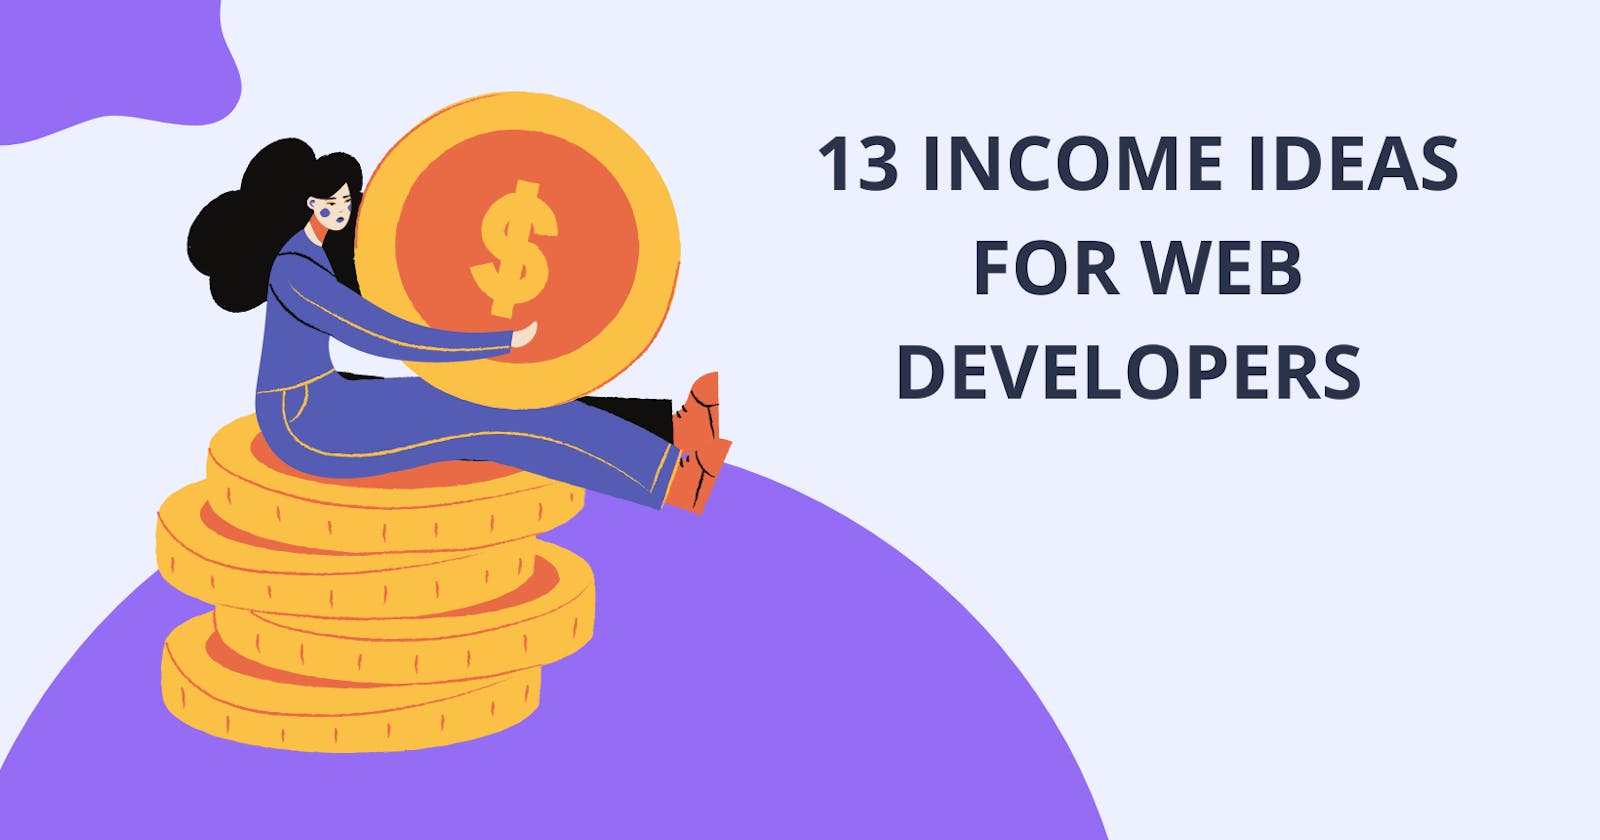 13 Income Ideas for Web Developers 💸✨